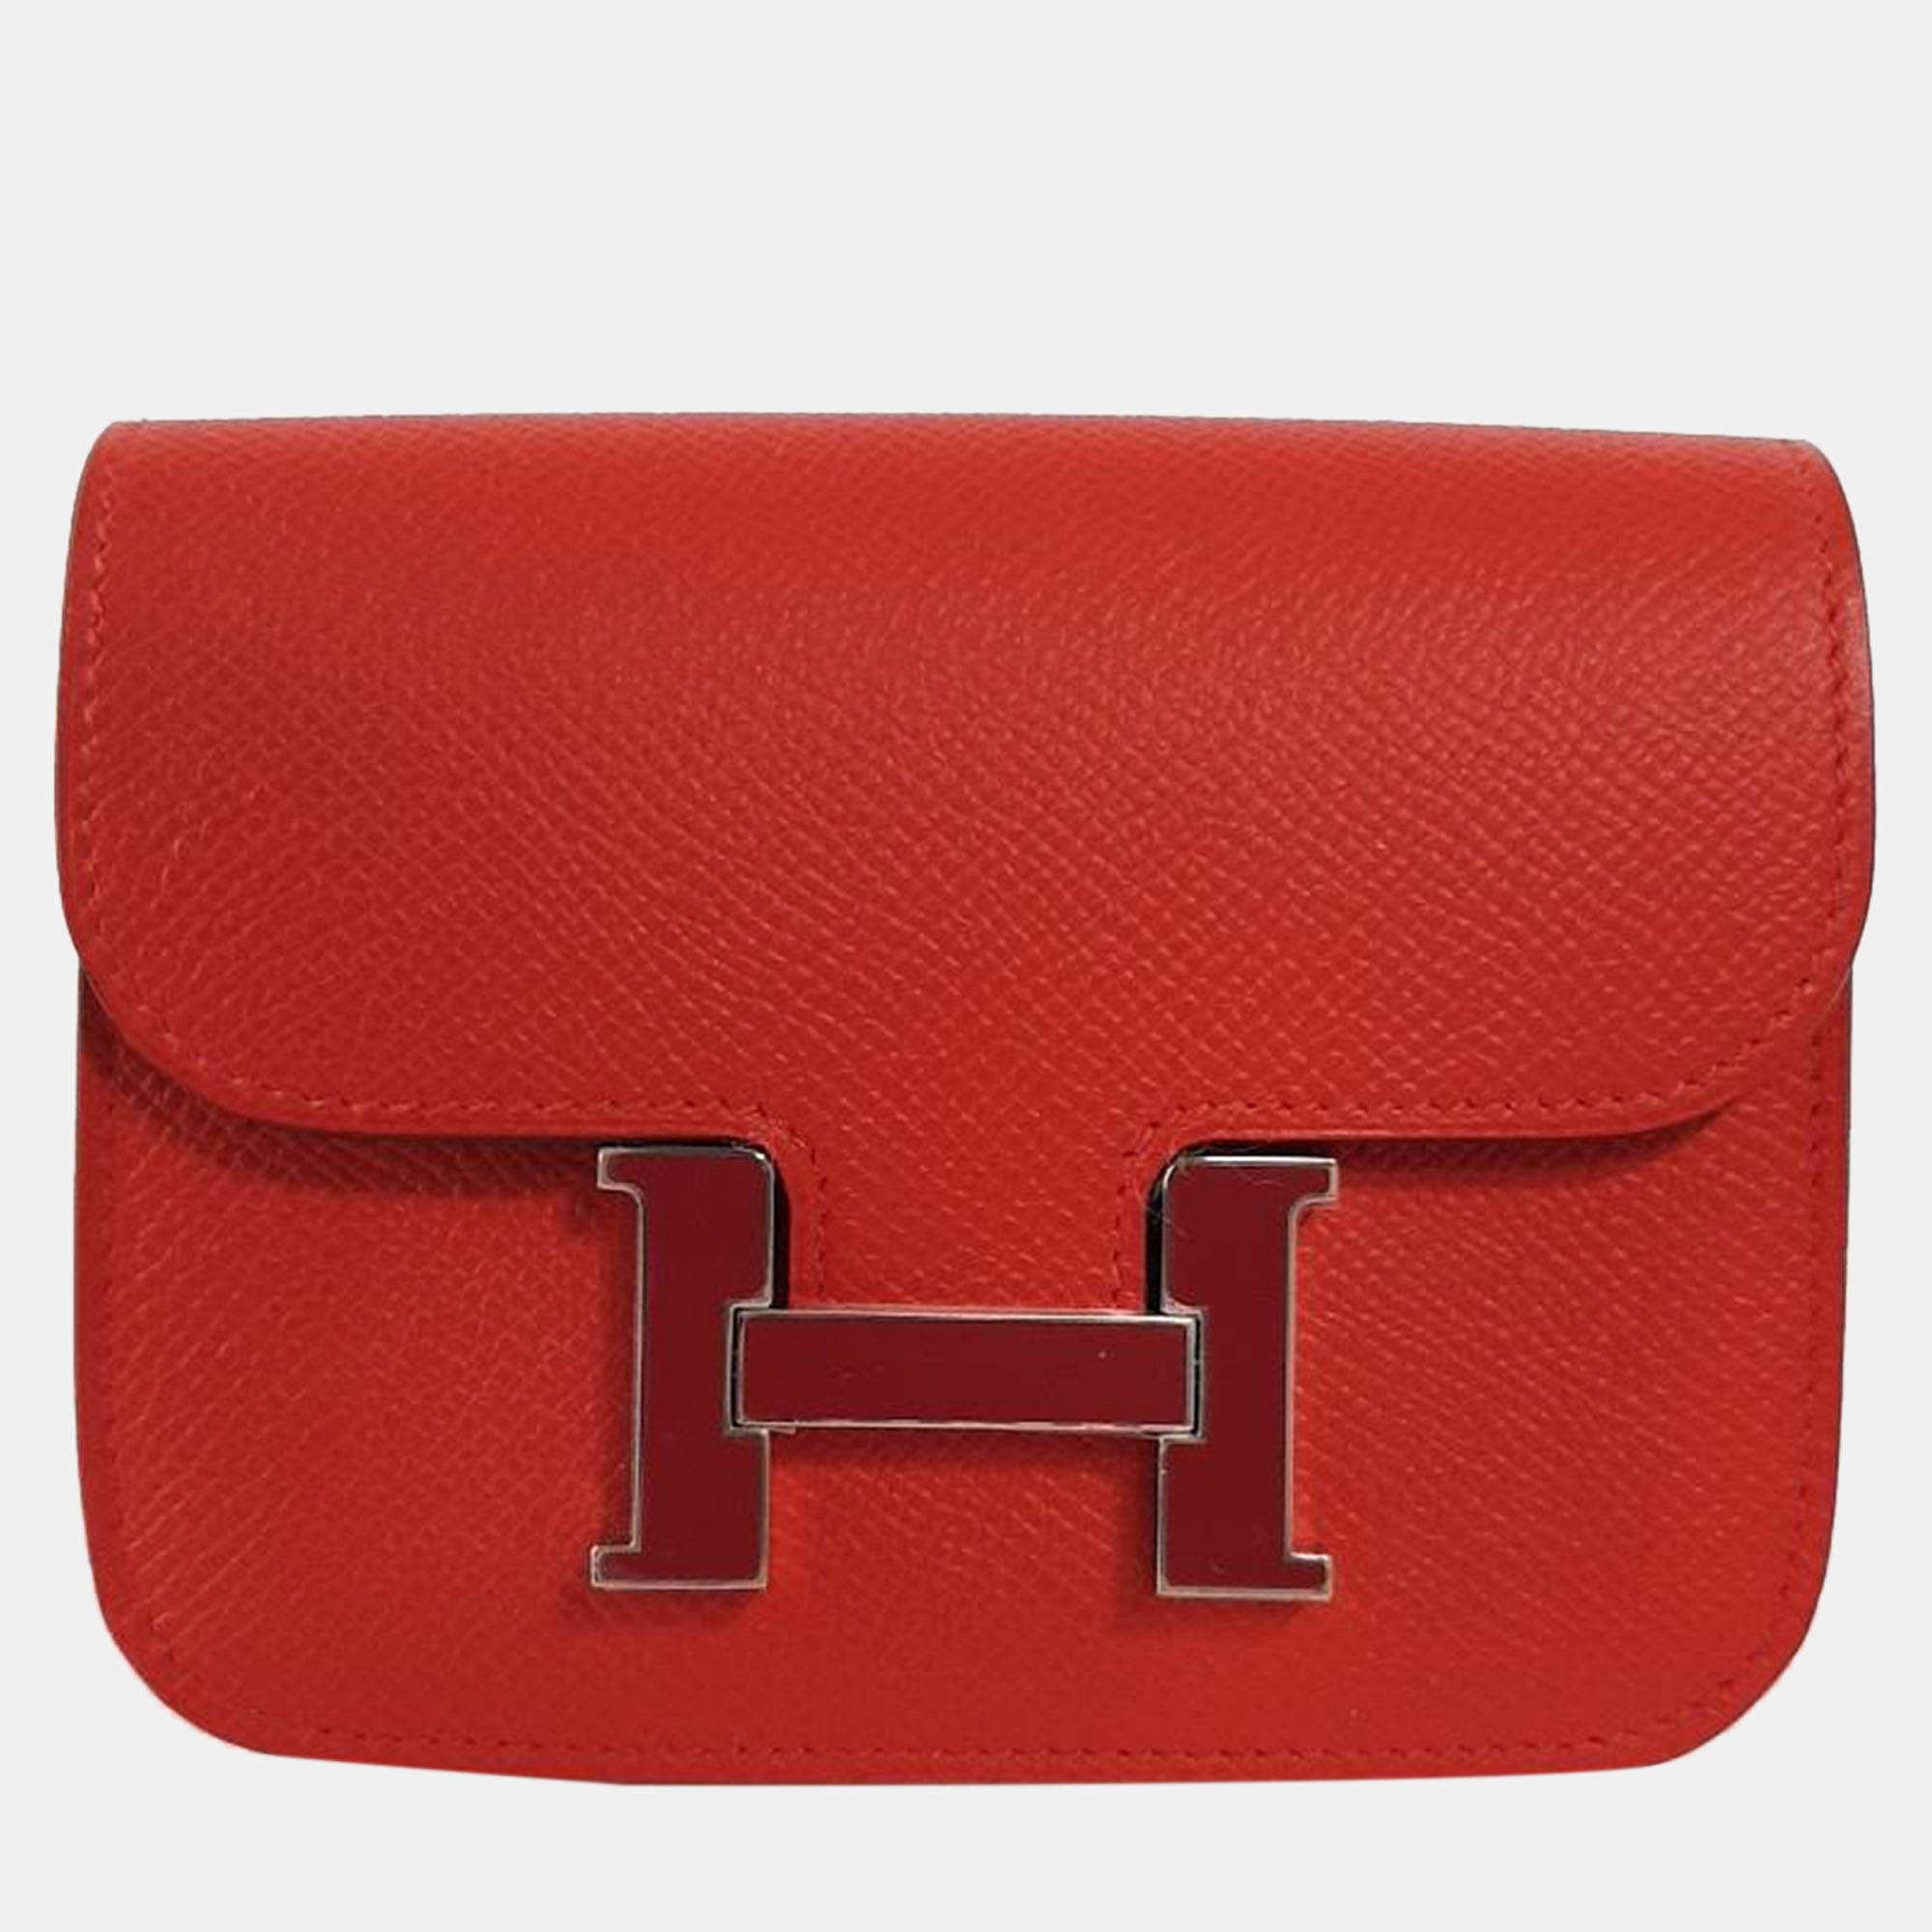 Hermes Red Leather Constance Bag